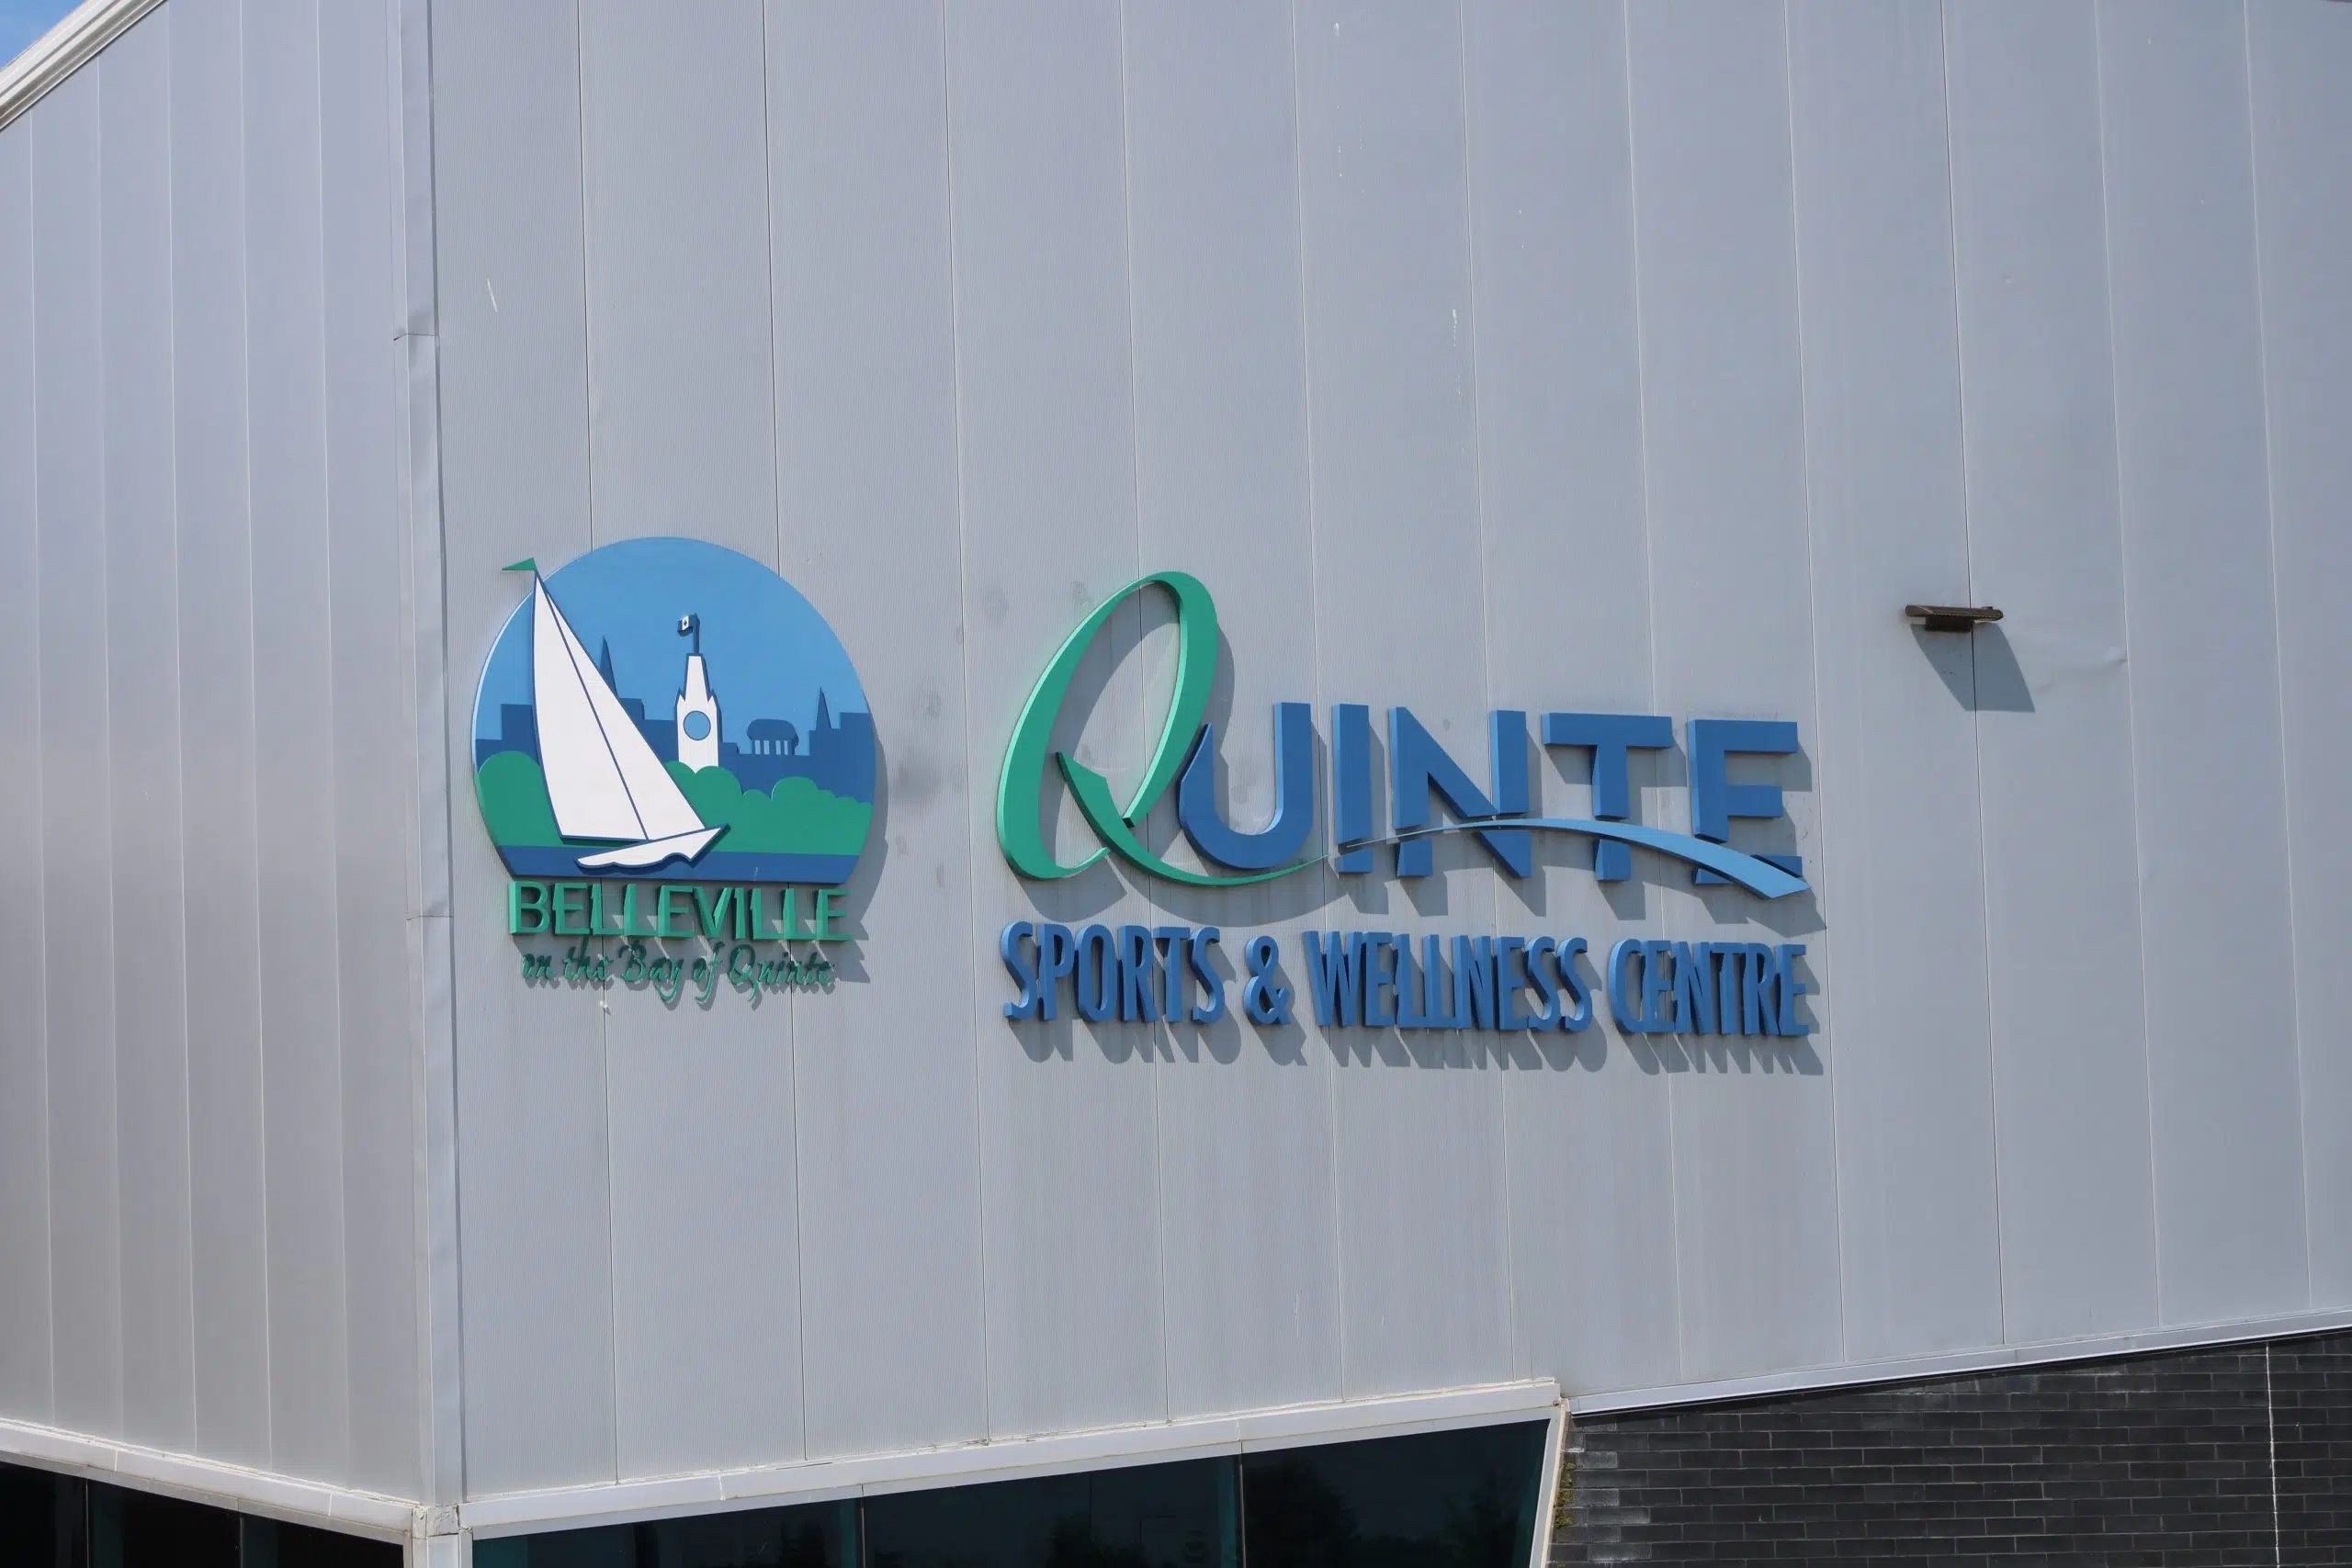 Quinte Sports and Wellness Centre to be used as COVID-19 vaccination clinic